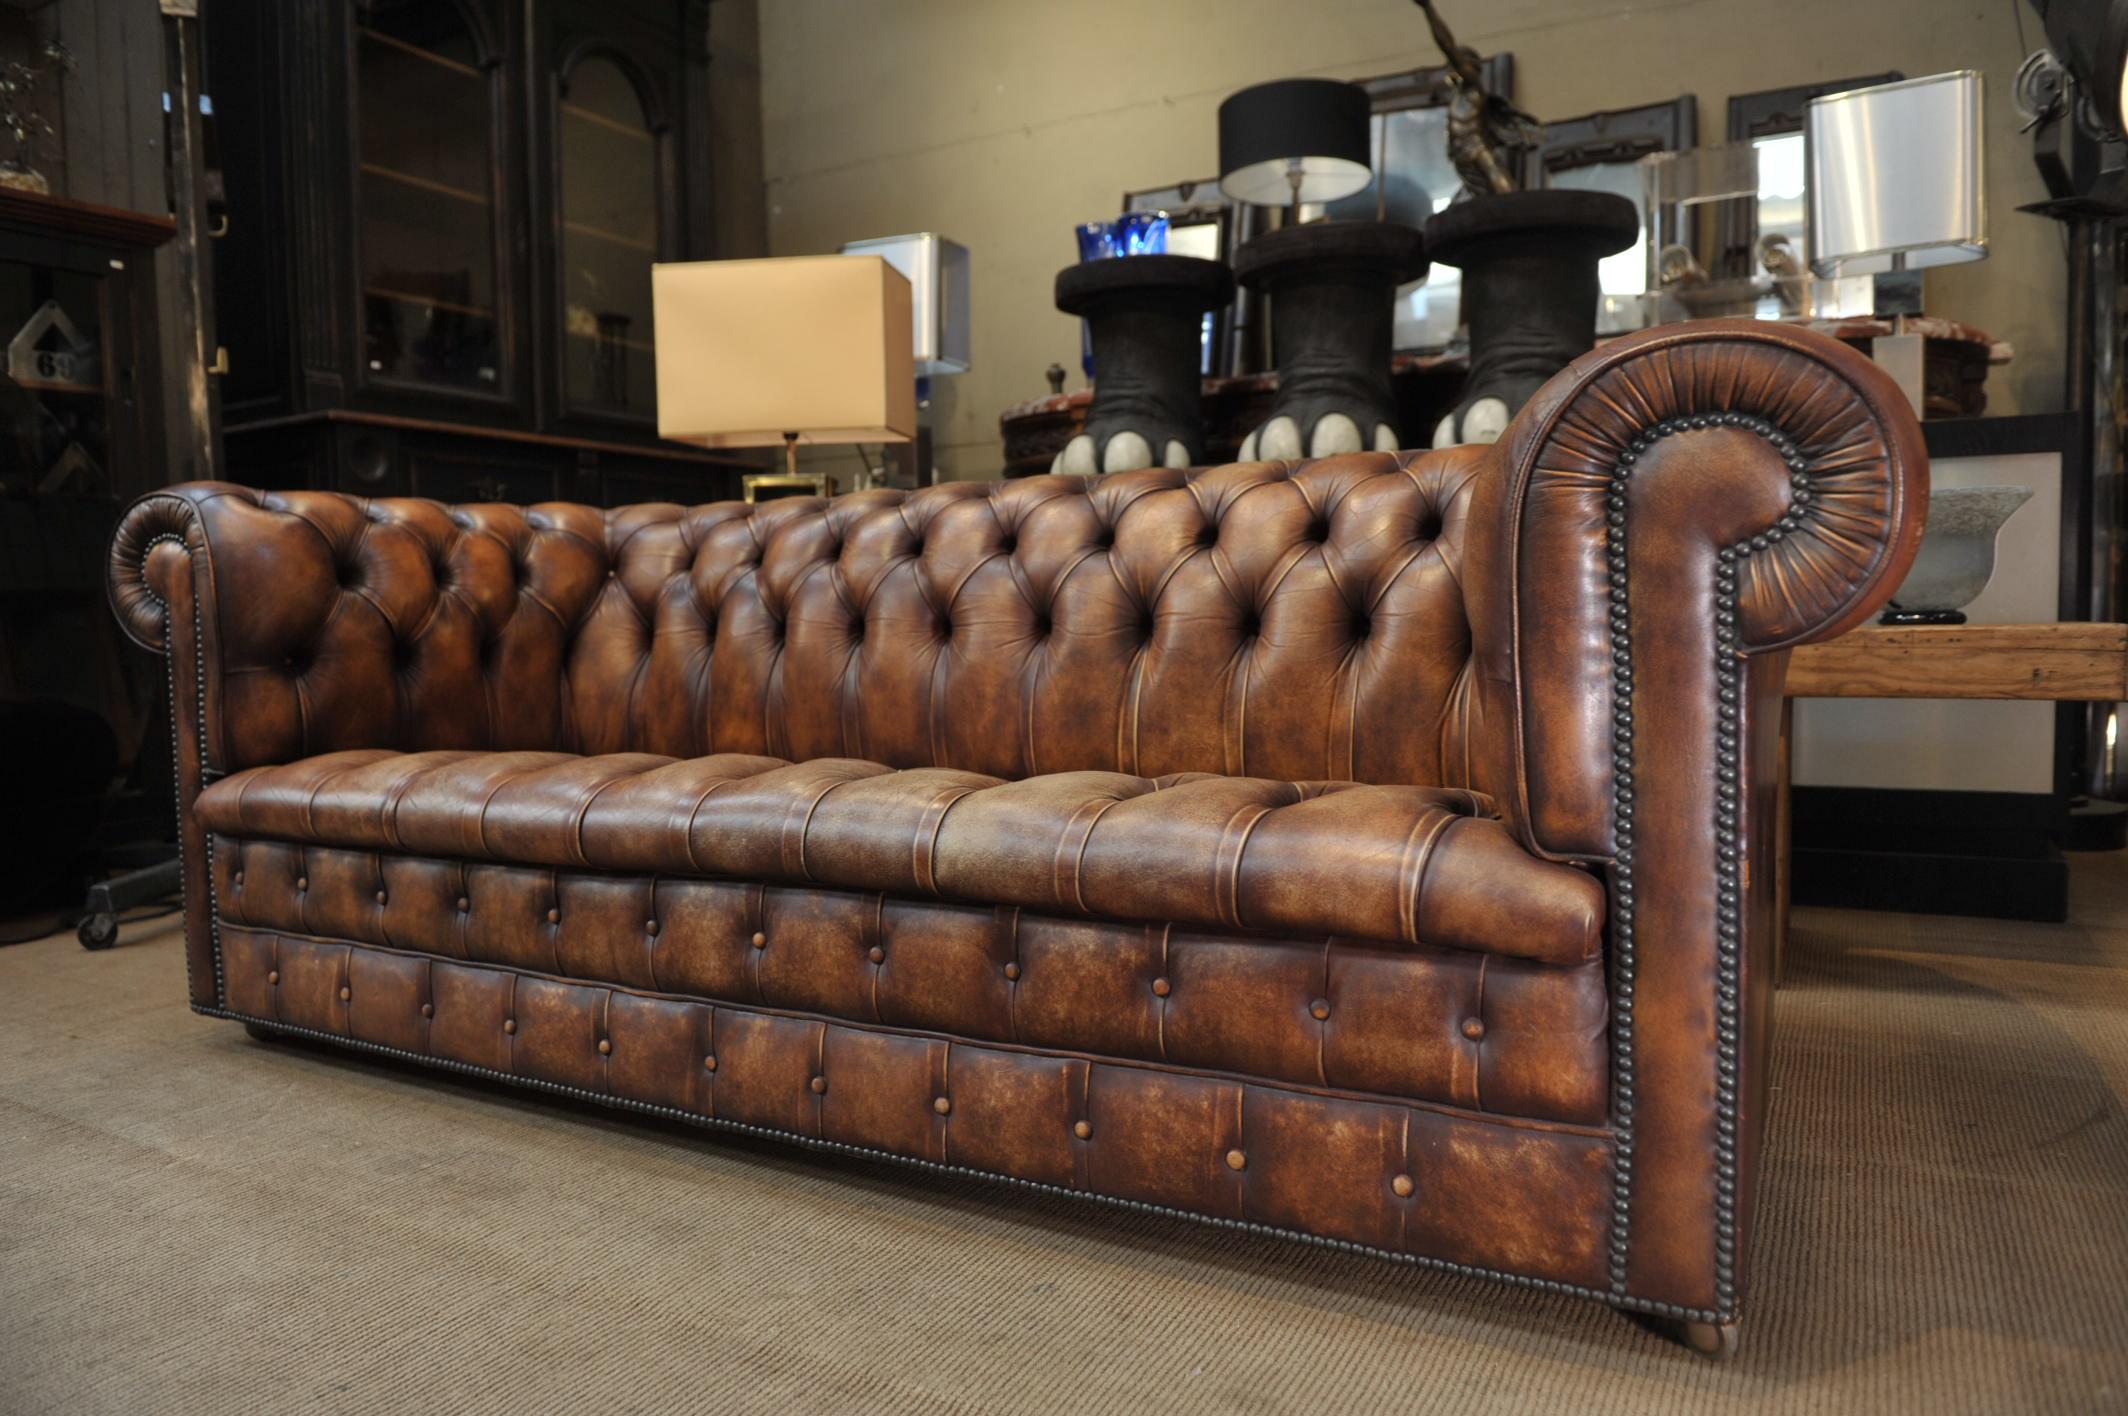 Late 20th Century Leather Chesterfield Sofa circa 1970 from 